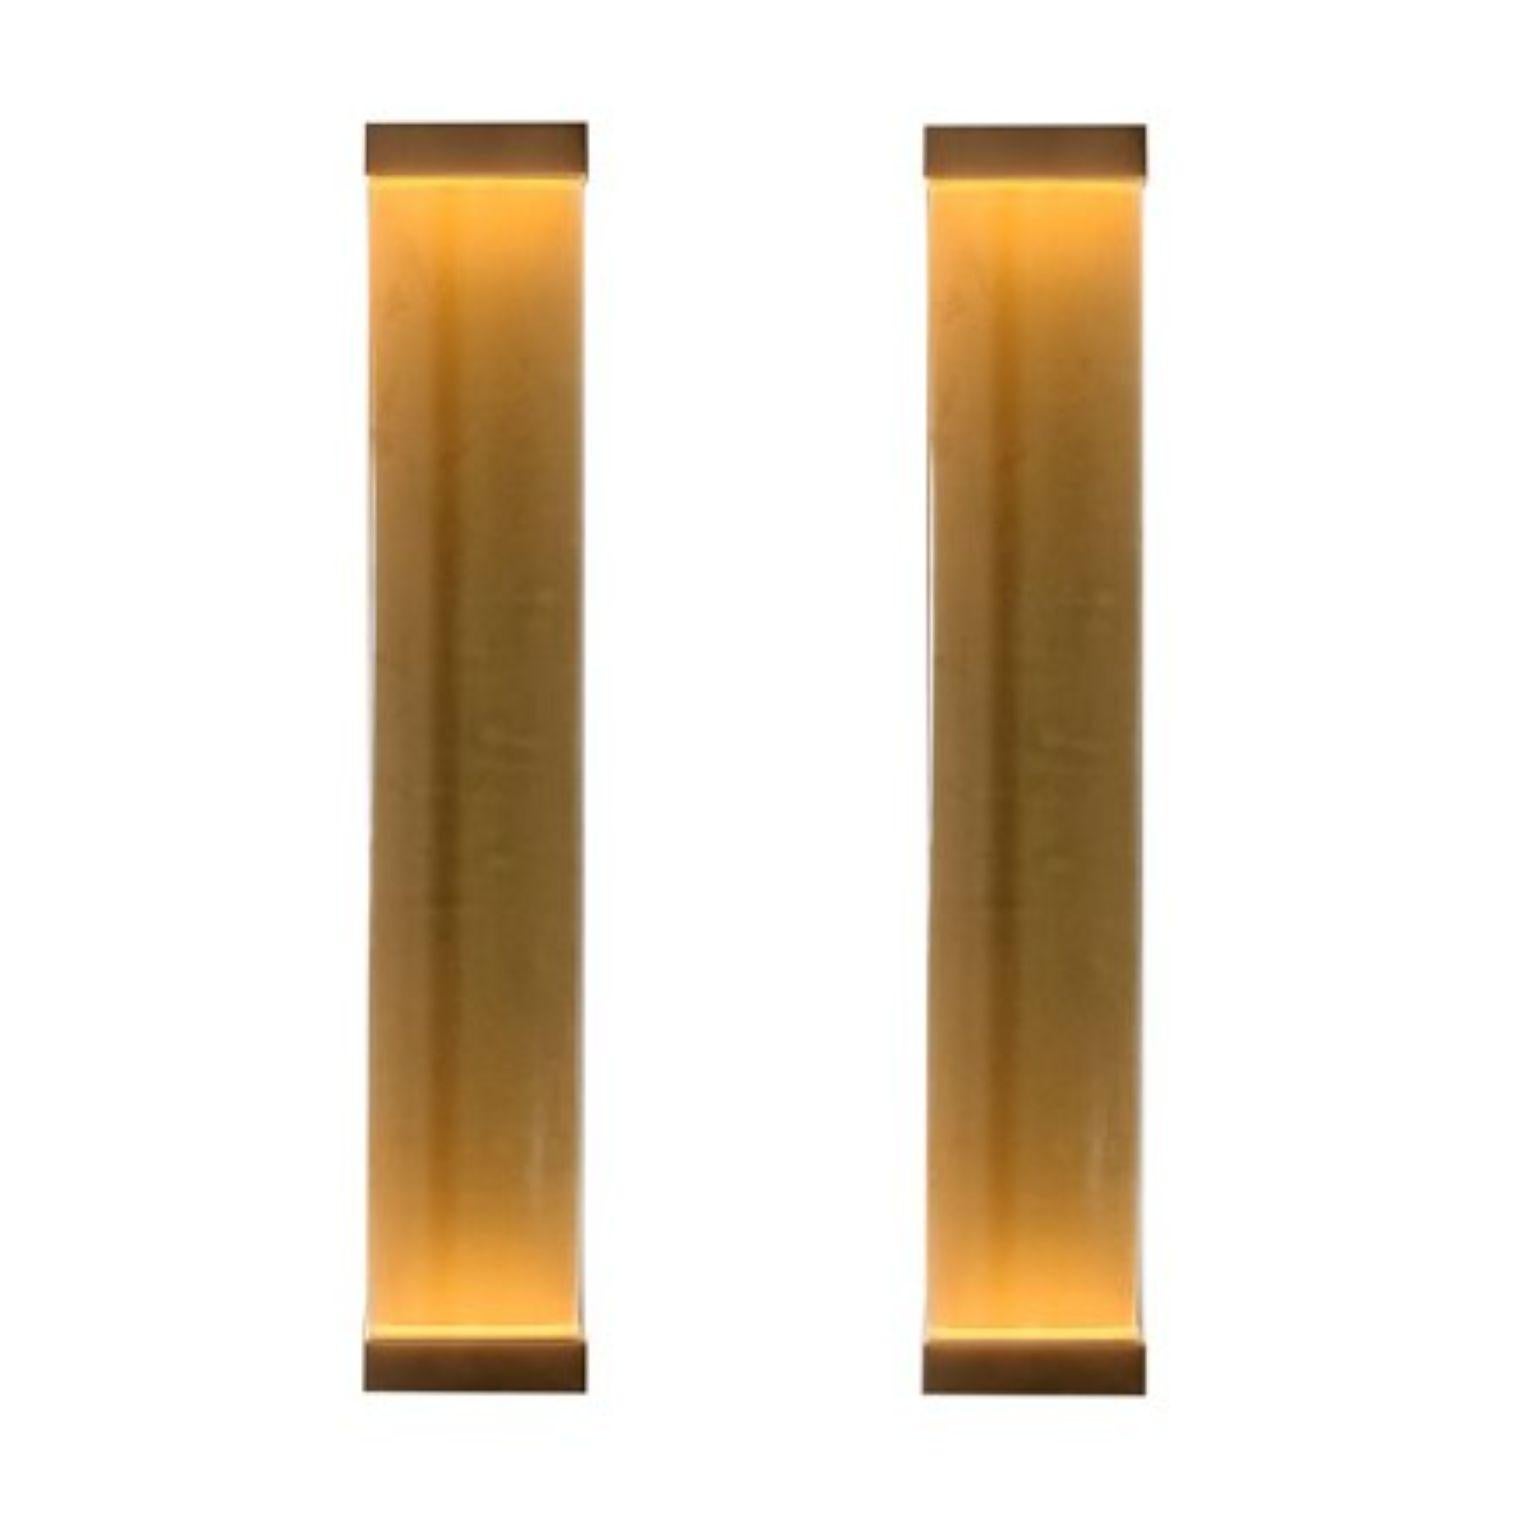 Set of 2 Jud wall lamps by Draga & Aurel
Dimensions: W 23, D 10, H 131.
Materials: Resin and brass

All our lamps can be wired according to each country. If sold to the USA it will be wired for the USA for instance.

Inspired by minimalism,